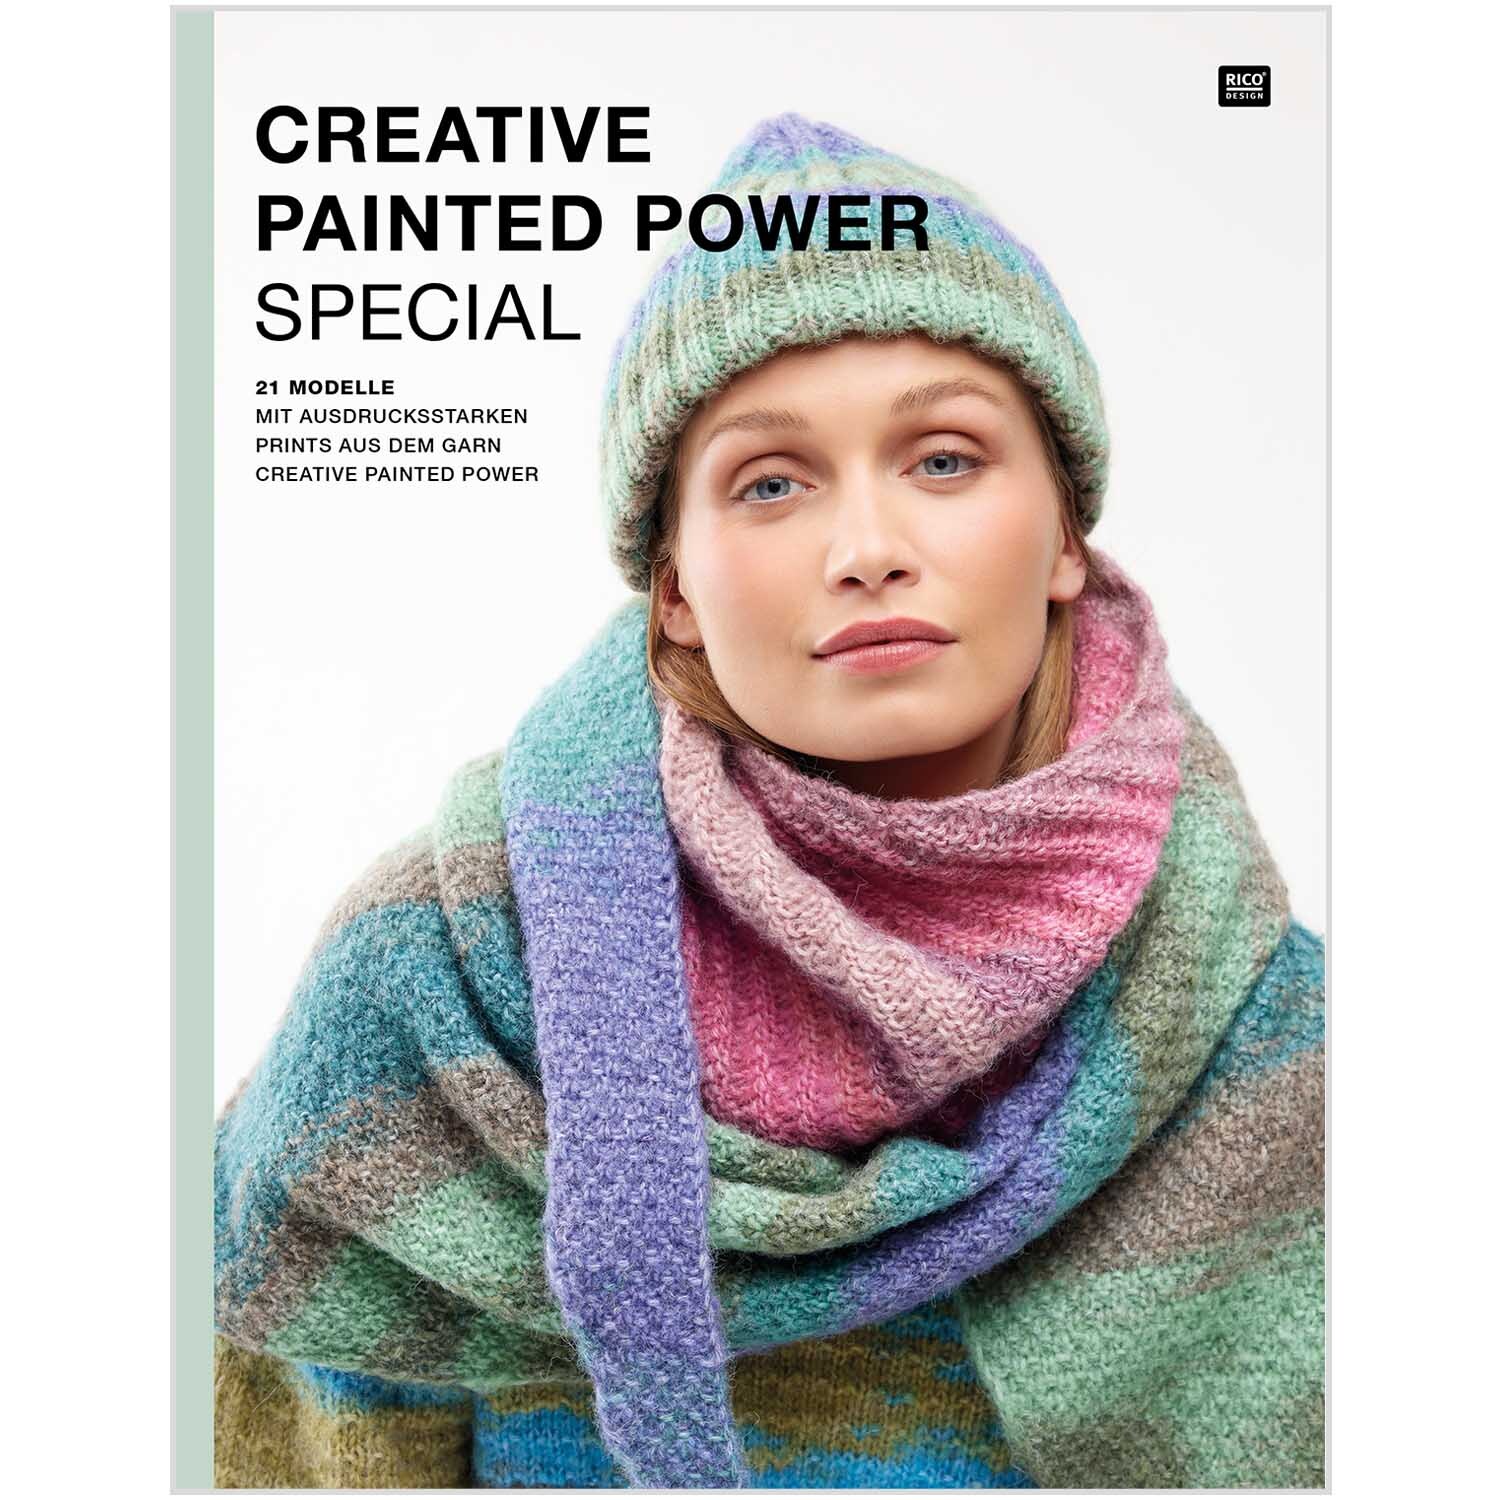 Creative Painted Power Special